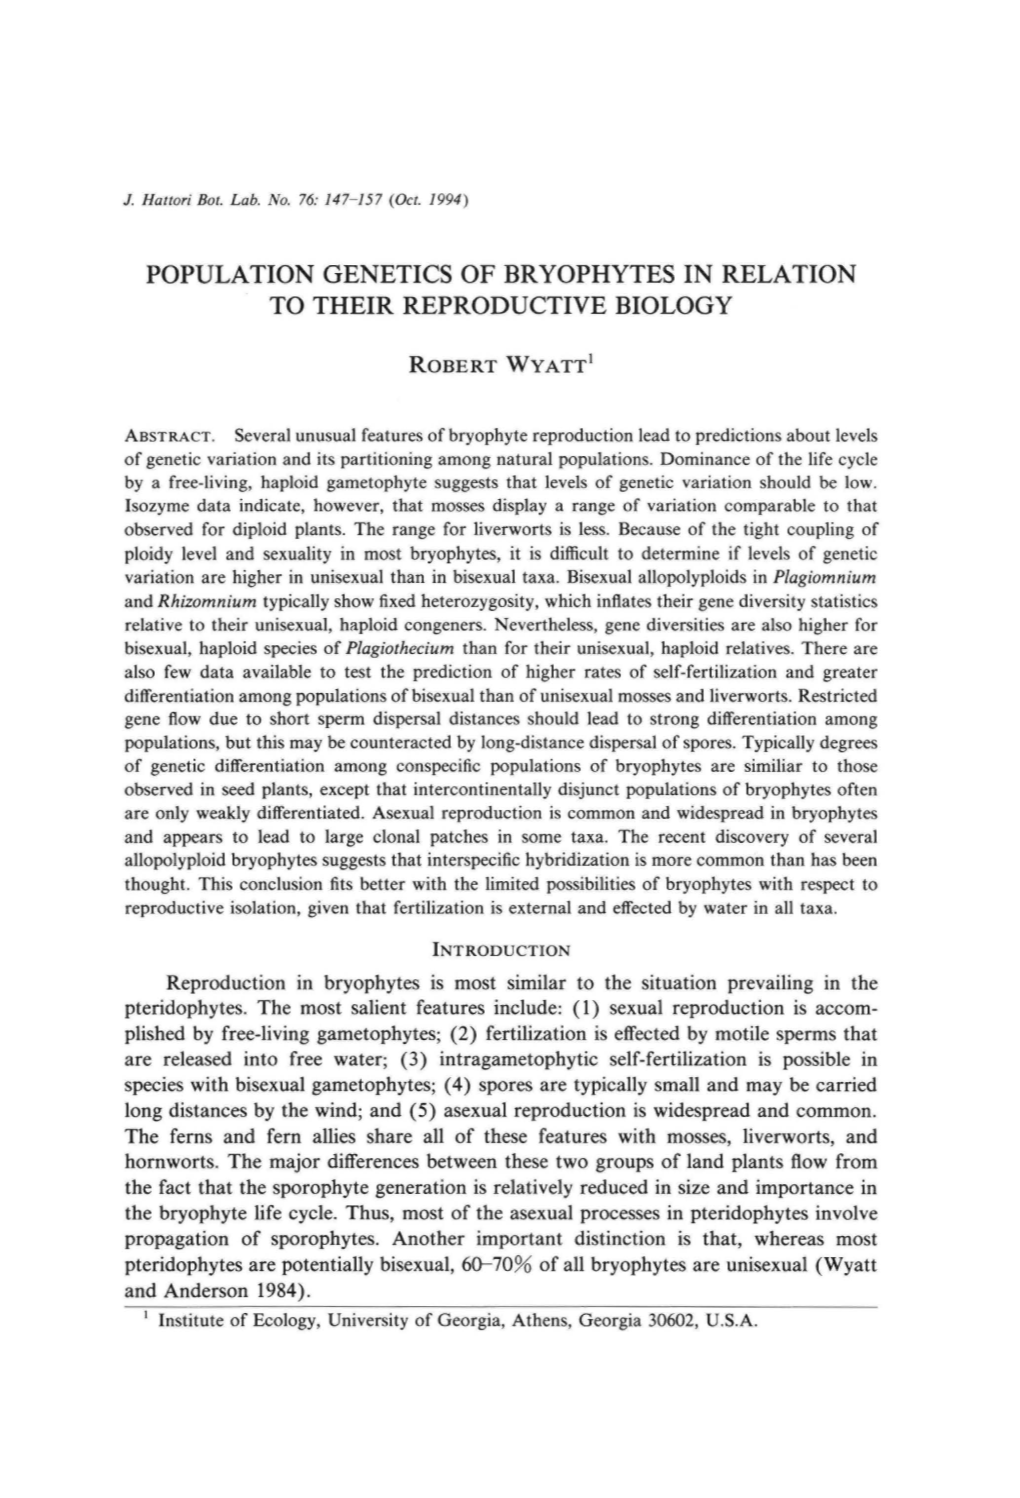 Population Genetics of Bryophytes in Relation to Their Reproductive Biology